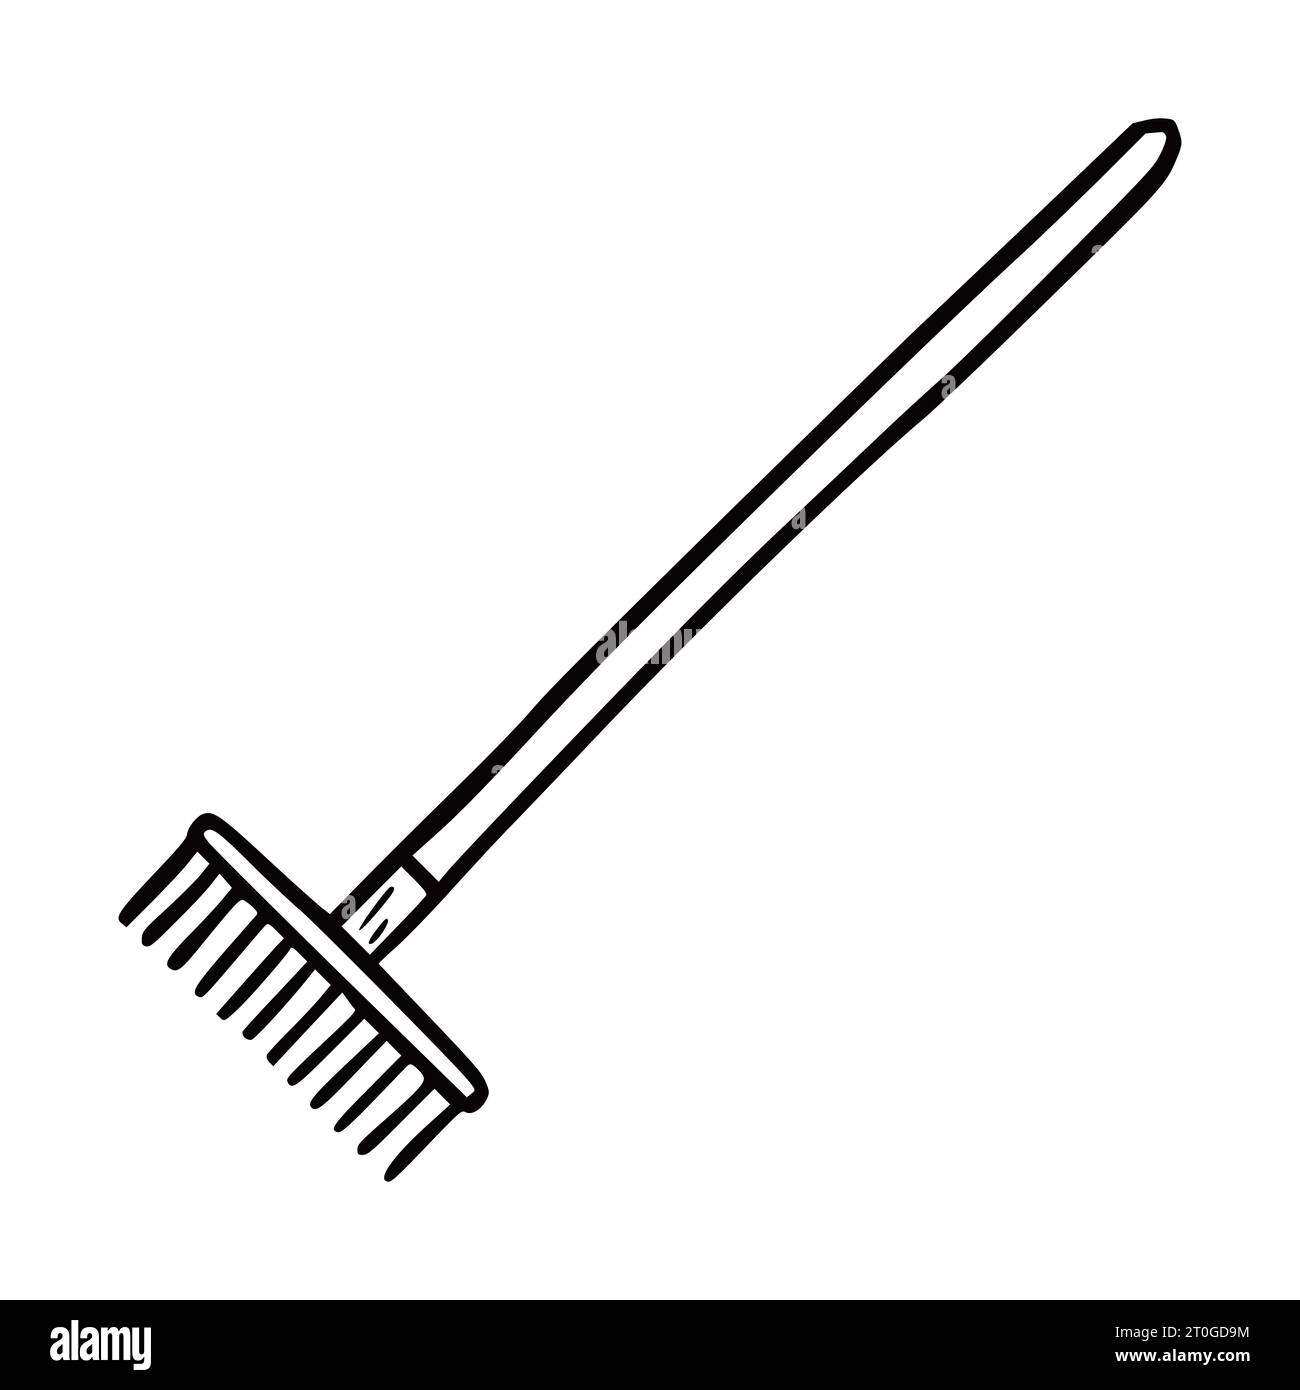 Hand drawn garden tool rake. Doodle sketch style. Drawing line simple rake icon. Isolated vector illustration. Stock Vector